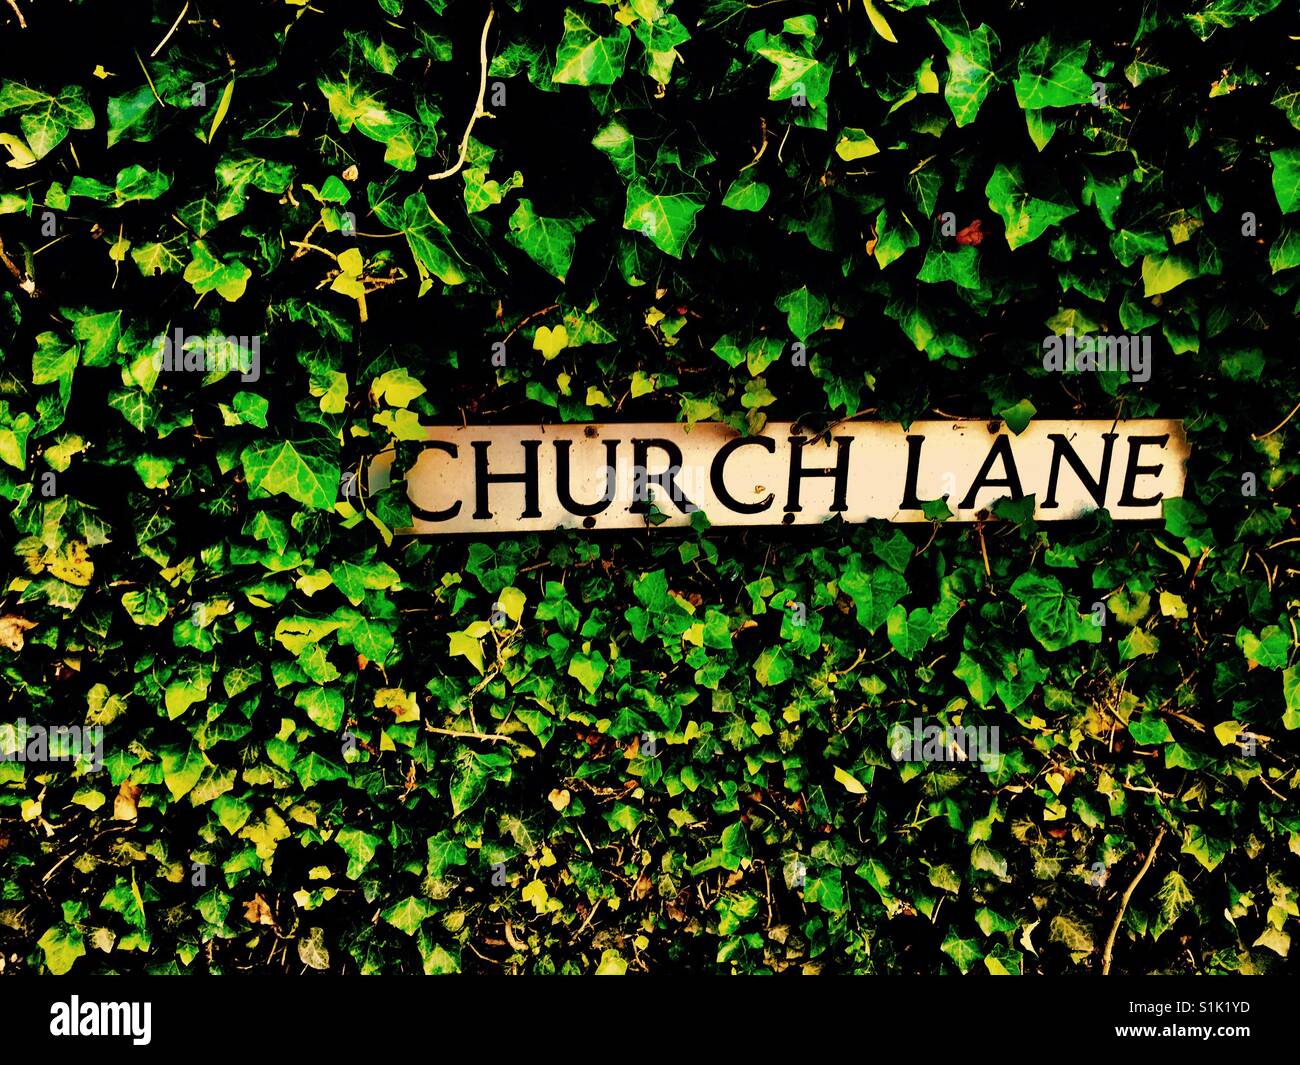 Church lNd sign against ivy greenery Stock Photo